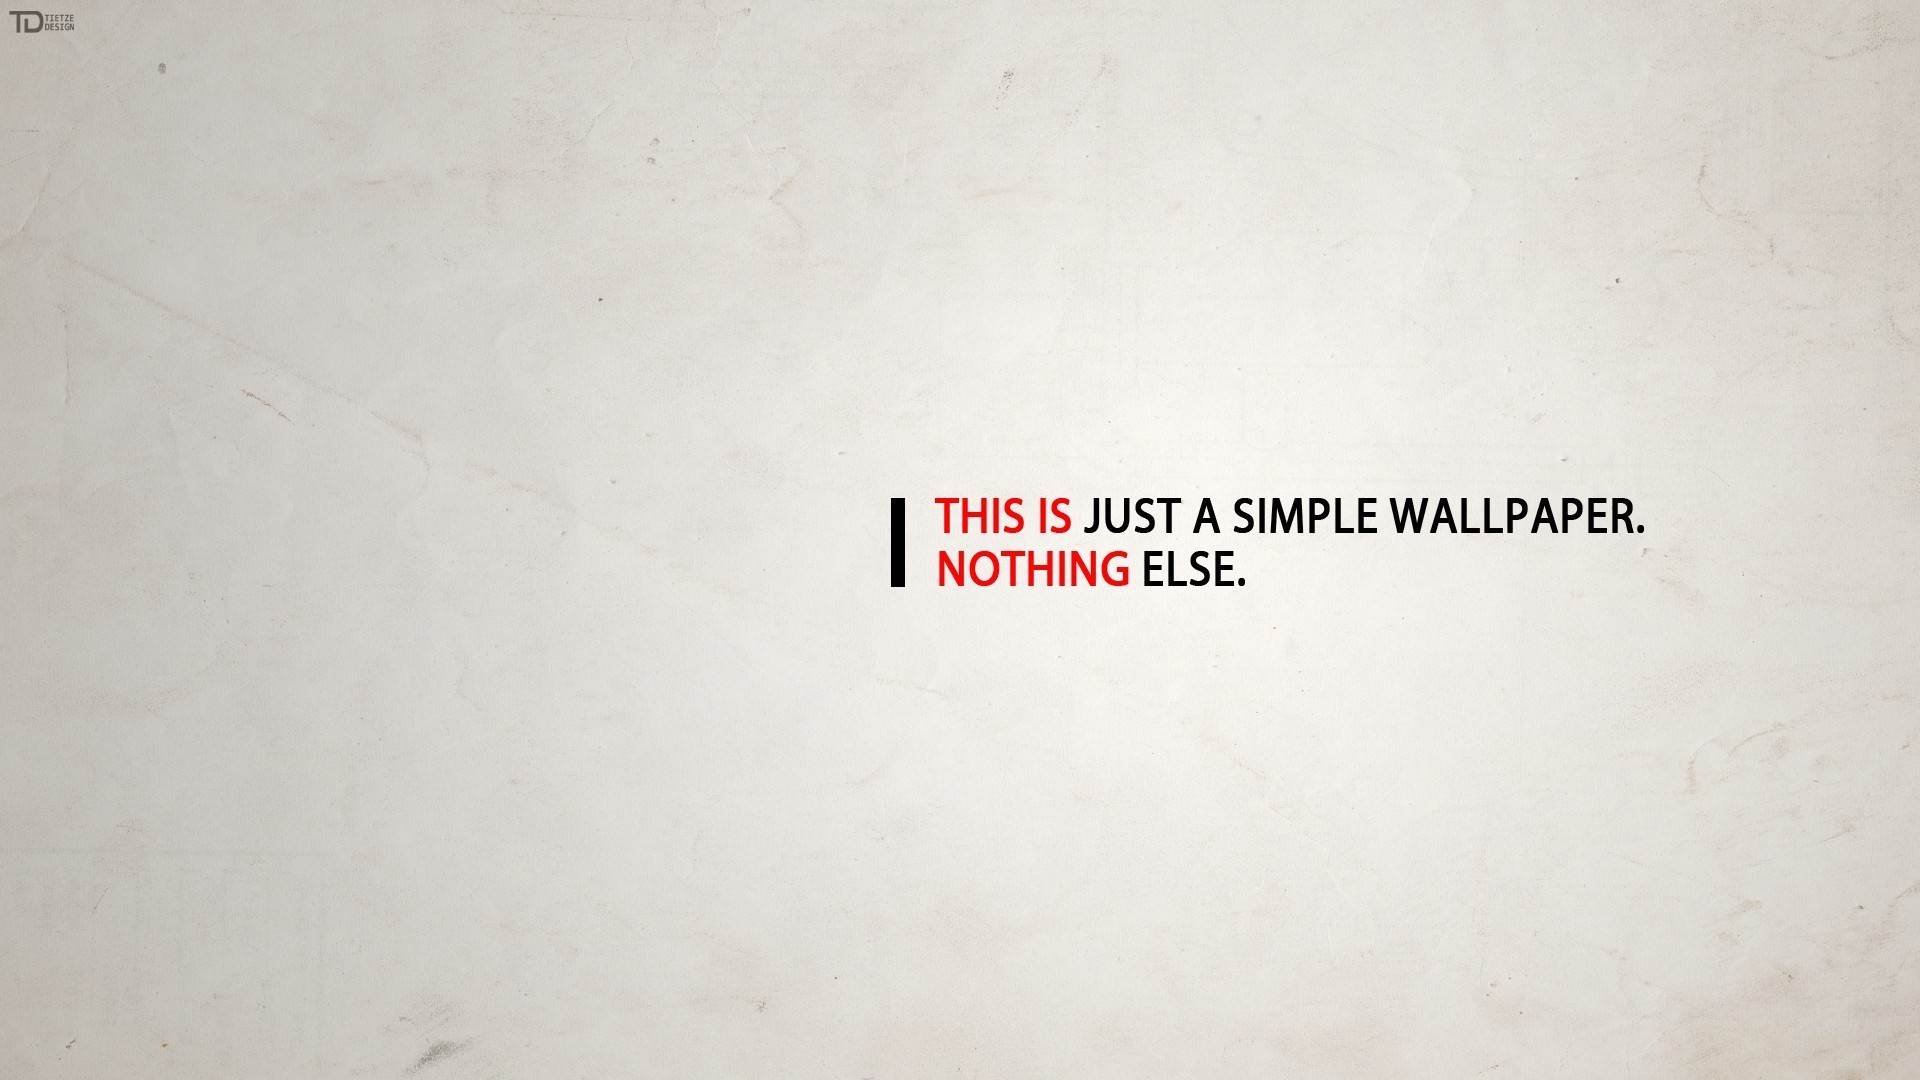 Great Quotes Wallpapers Group - Minimalist Motivational Wallpaper Hd -  1920x1080 Wallpaper 